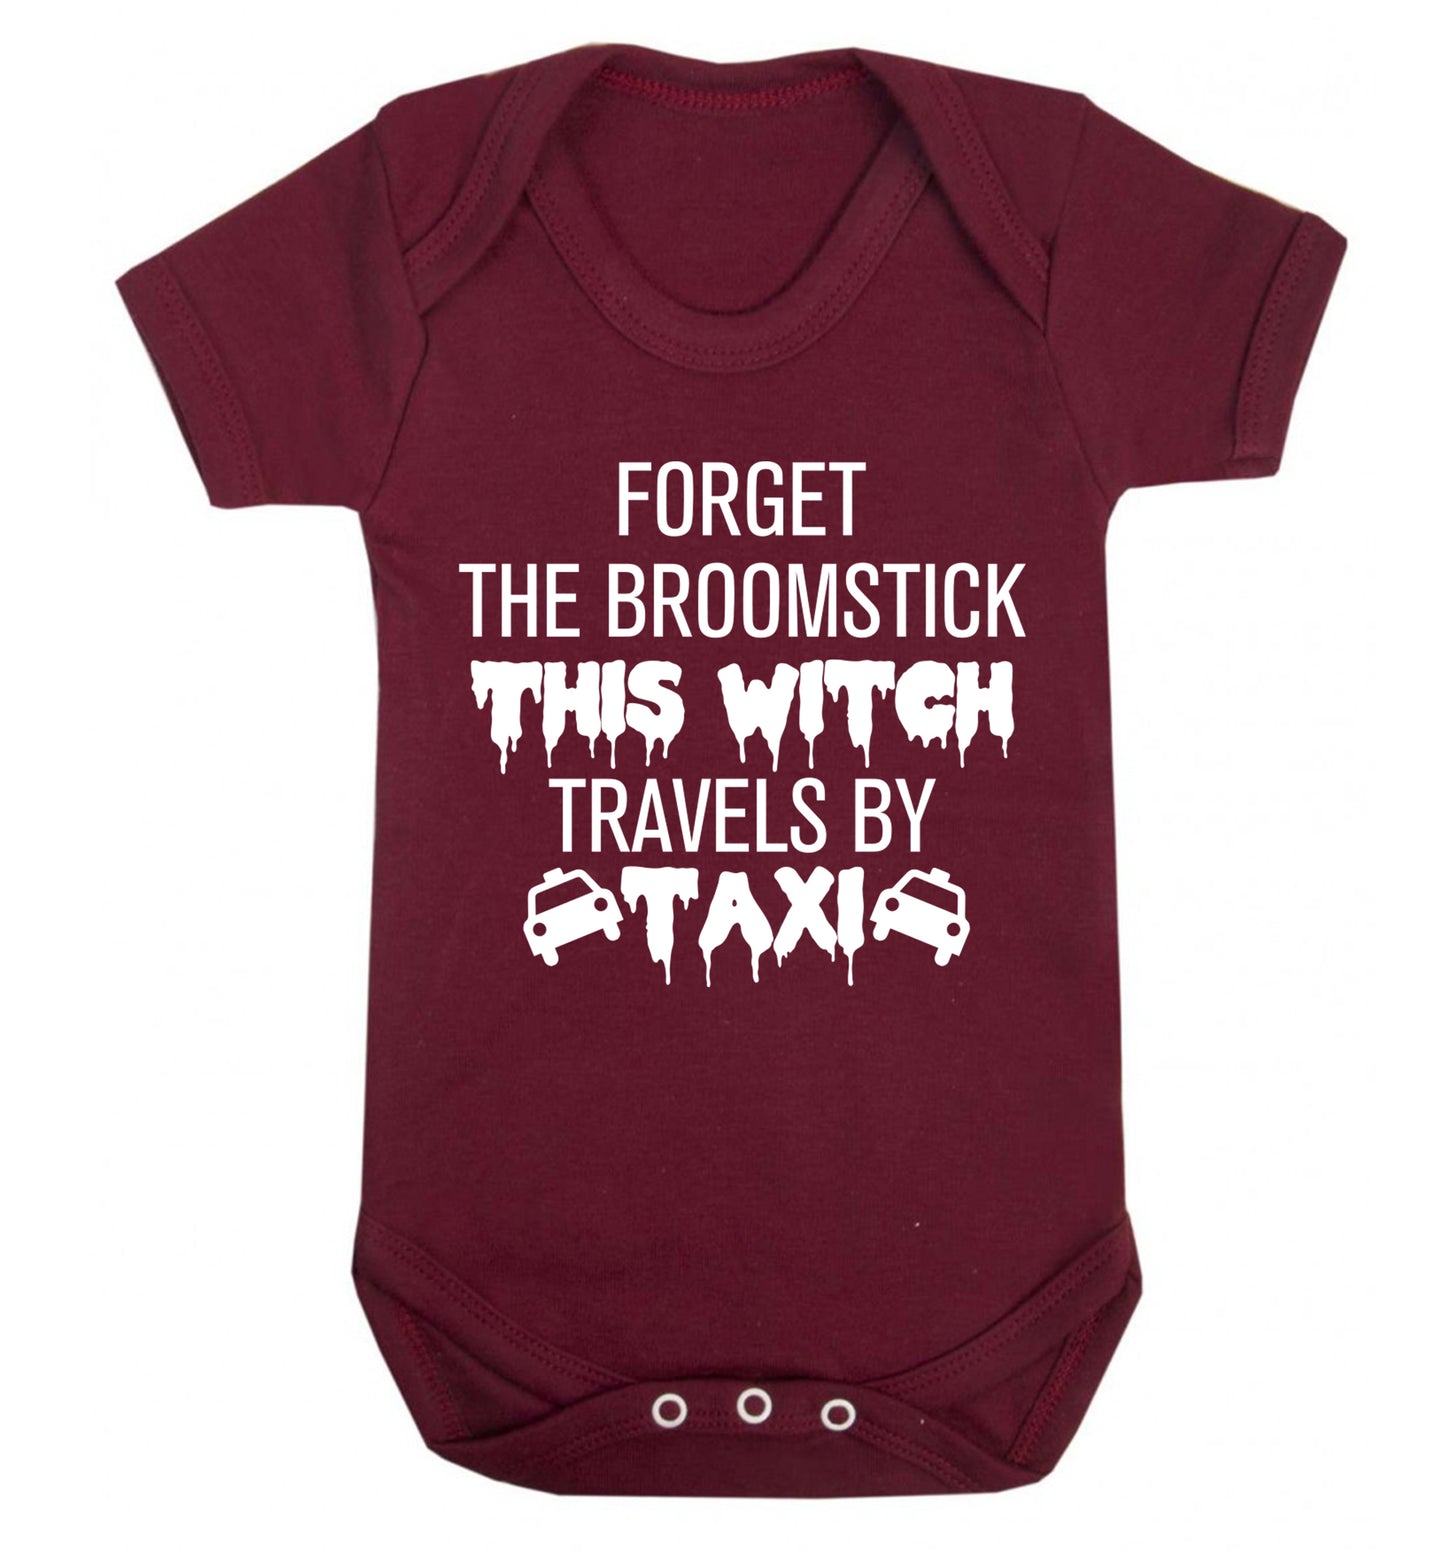 Forget the broomstick this witch travels by taxi Baby Vest maroon 18-24 months